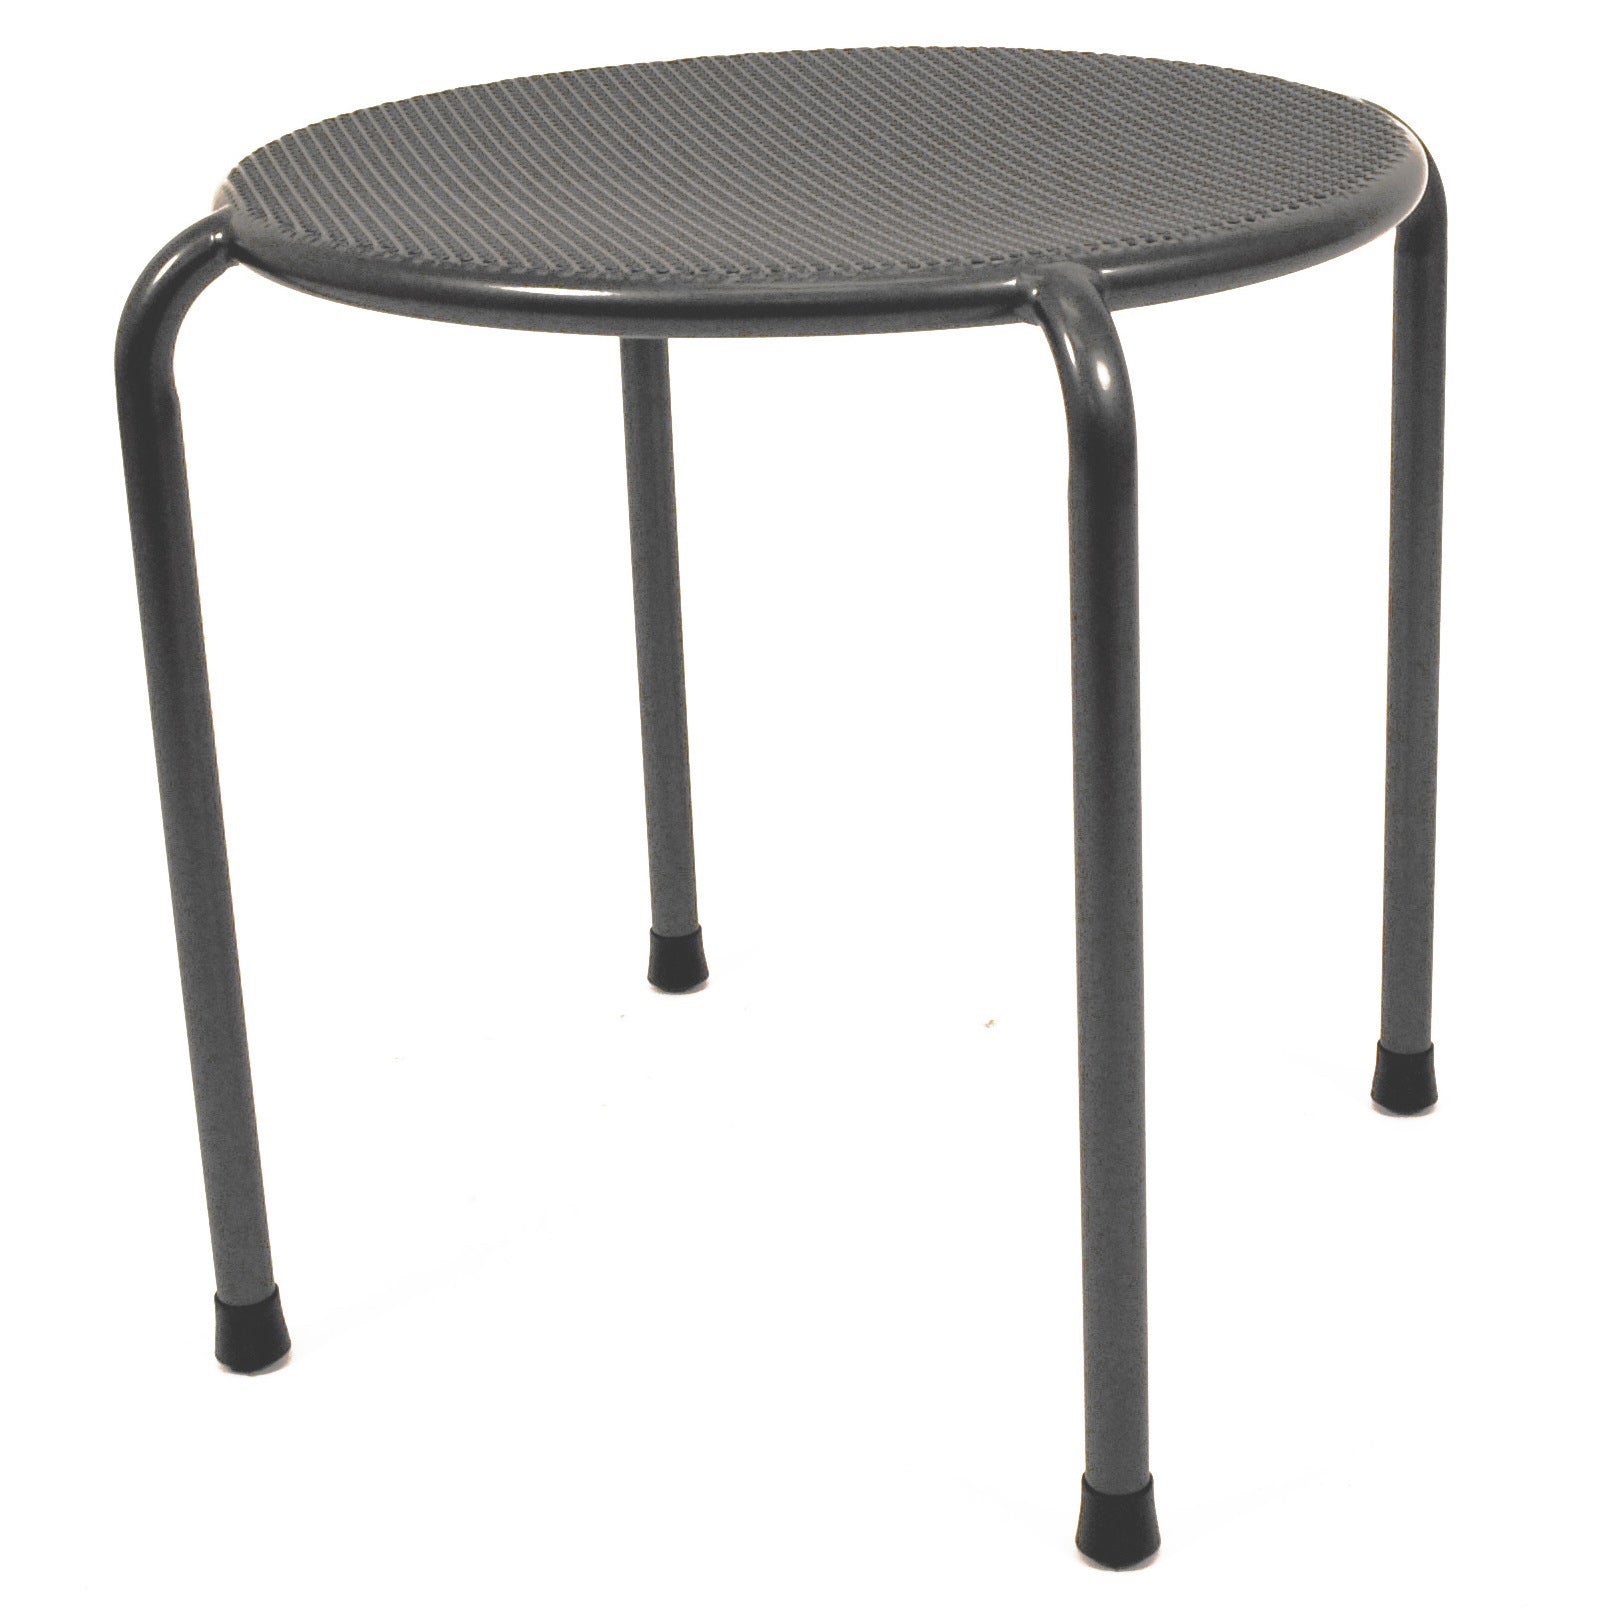 18" Round Side Table